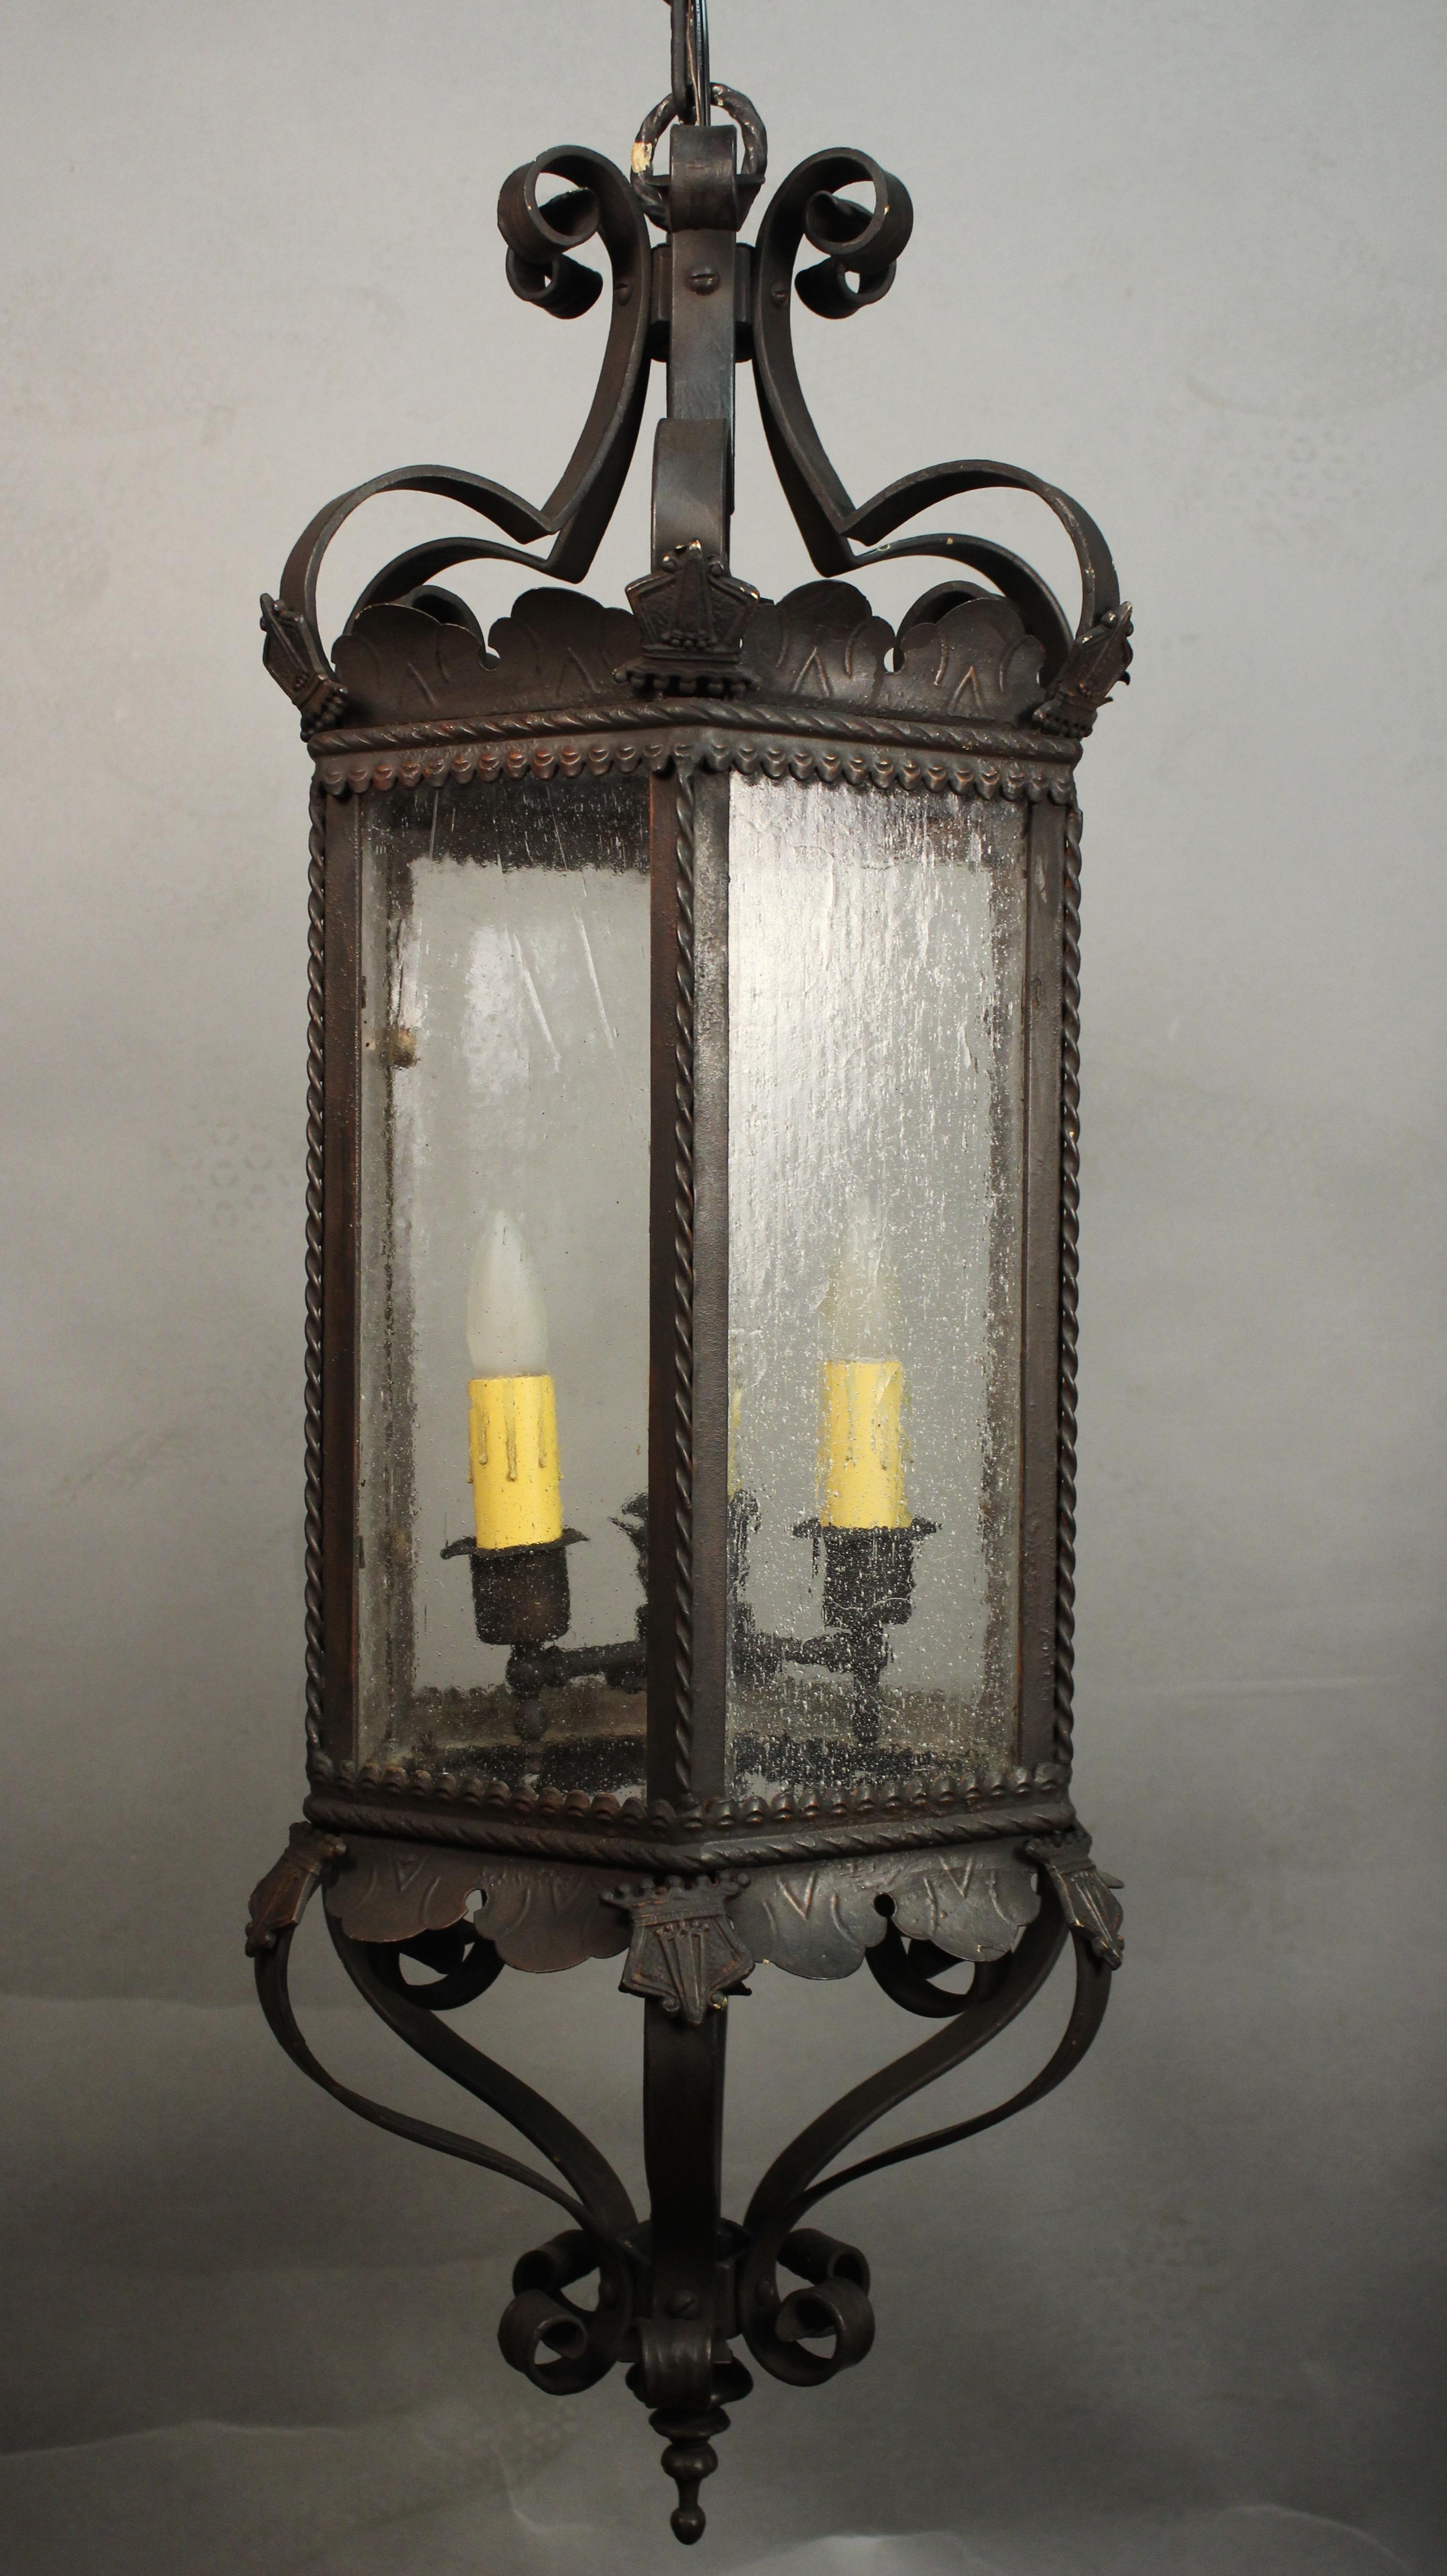 Very Large Spanish Revival 1920s Lantern Salvaged from Local Estate (Spanisch Kolonial)